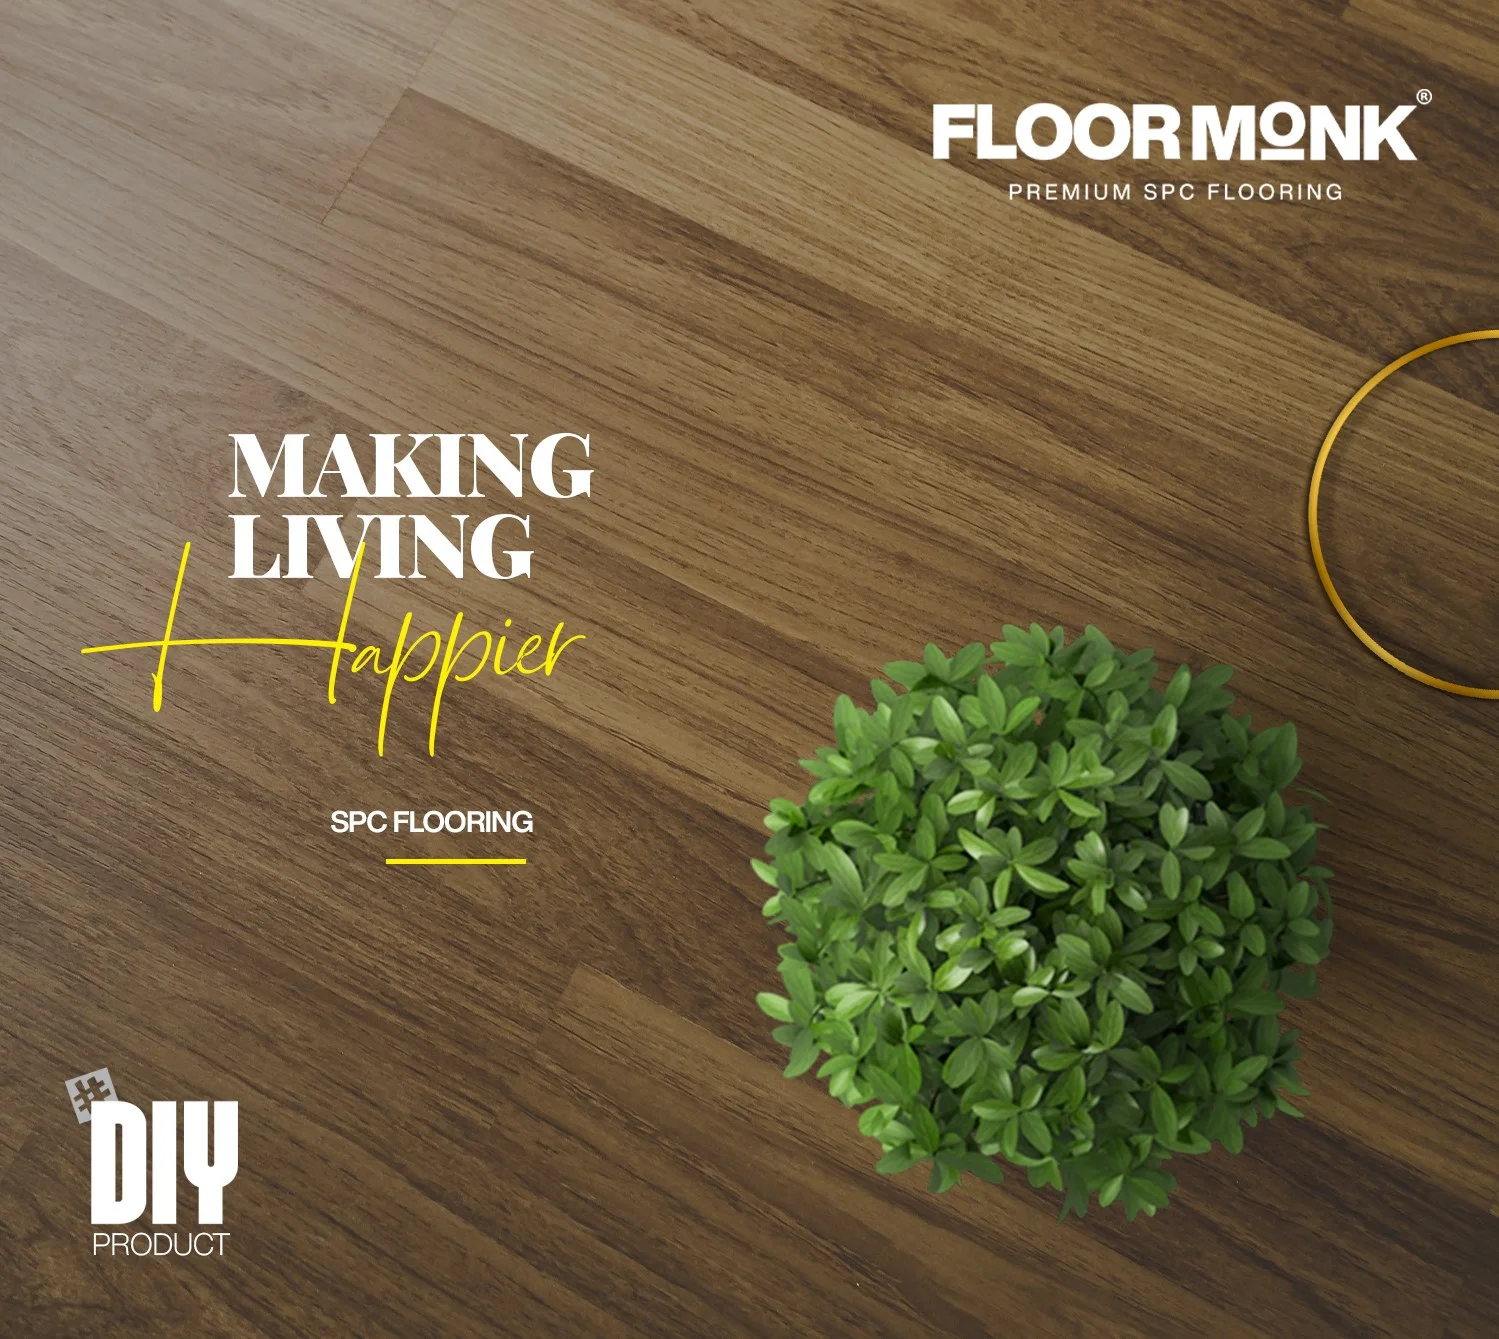 Eco-Friendly and Sustainable Practices of SPC Flooring